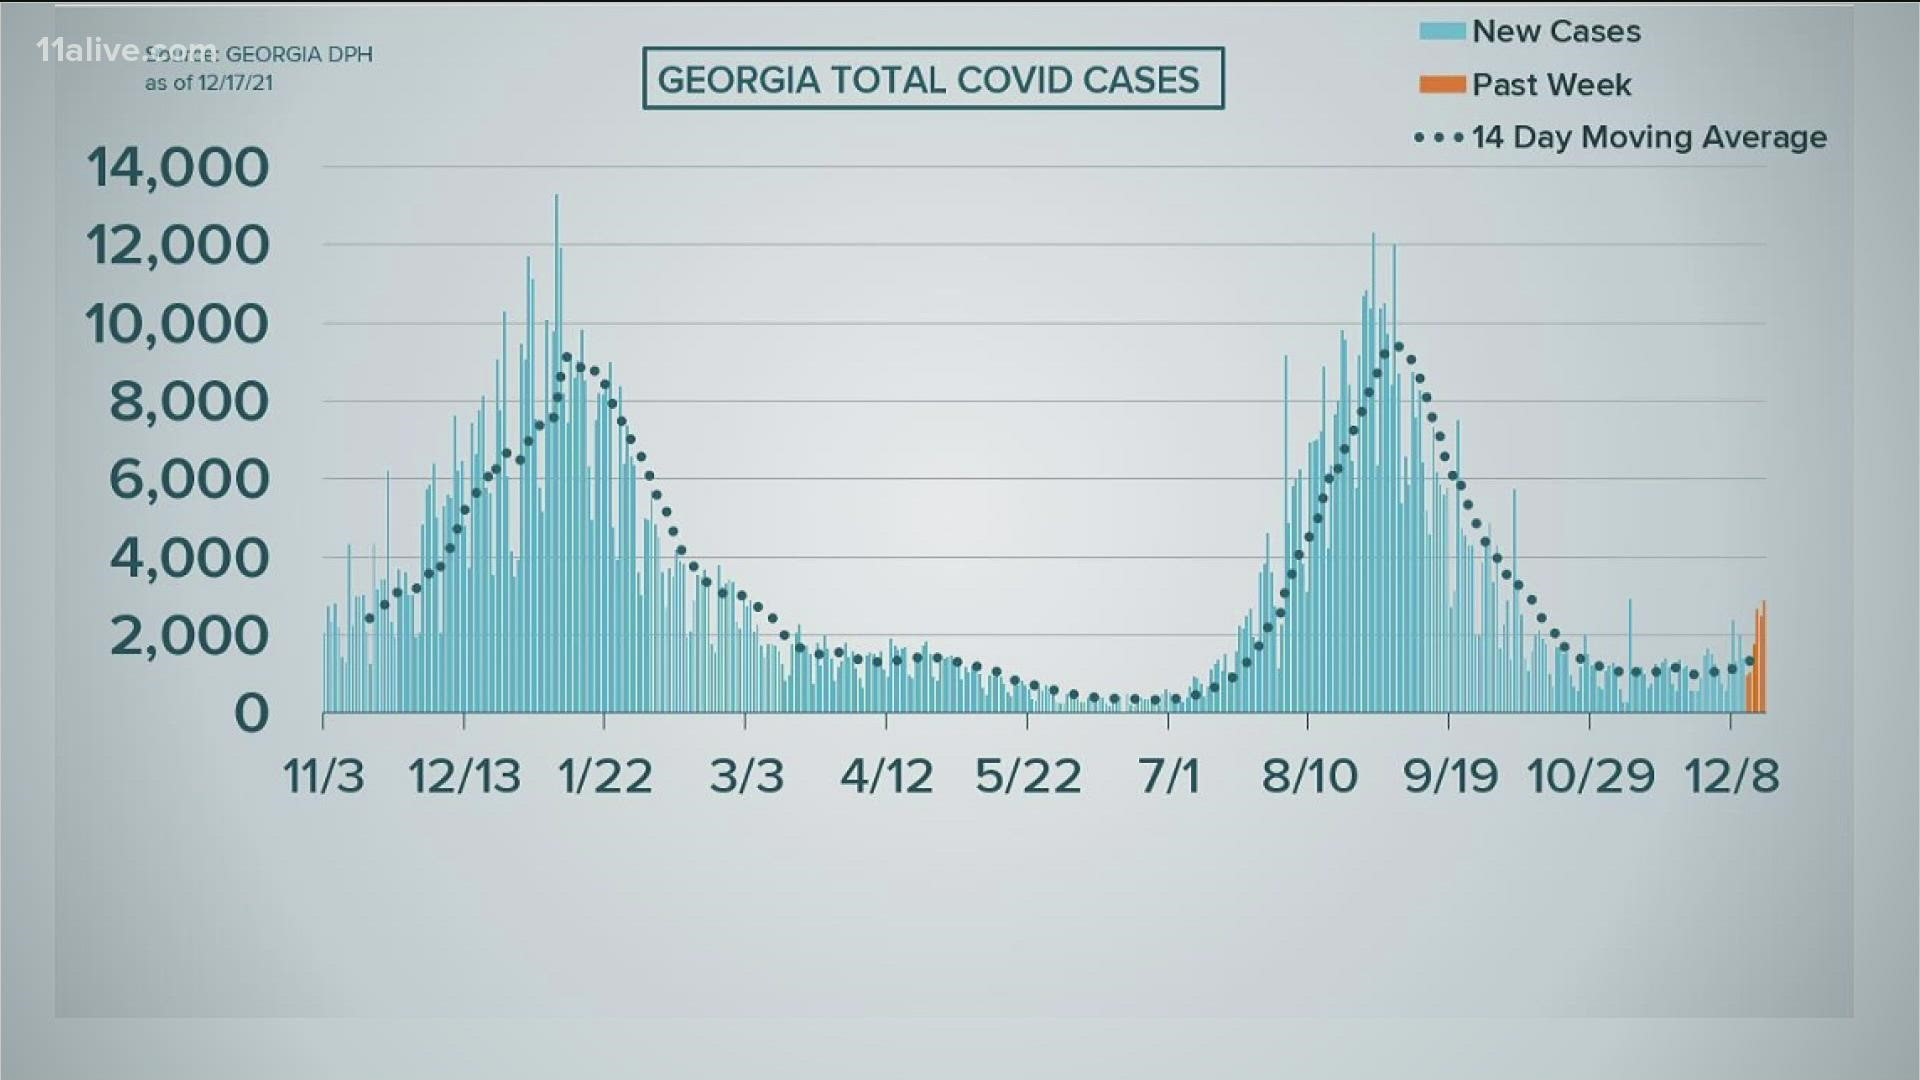 While there's no reason to sound the alarm yet here in Georgia, our case numbers are starting to rise.